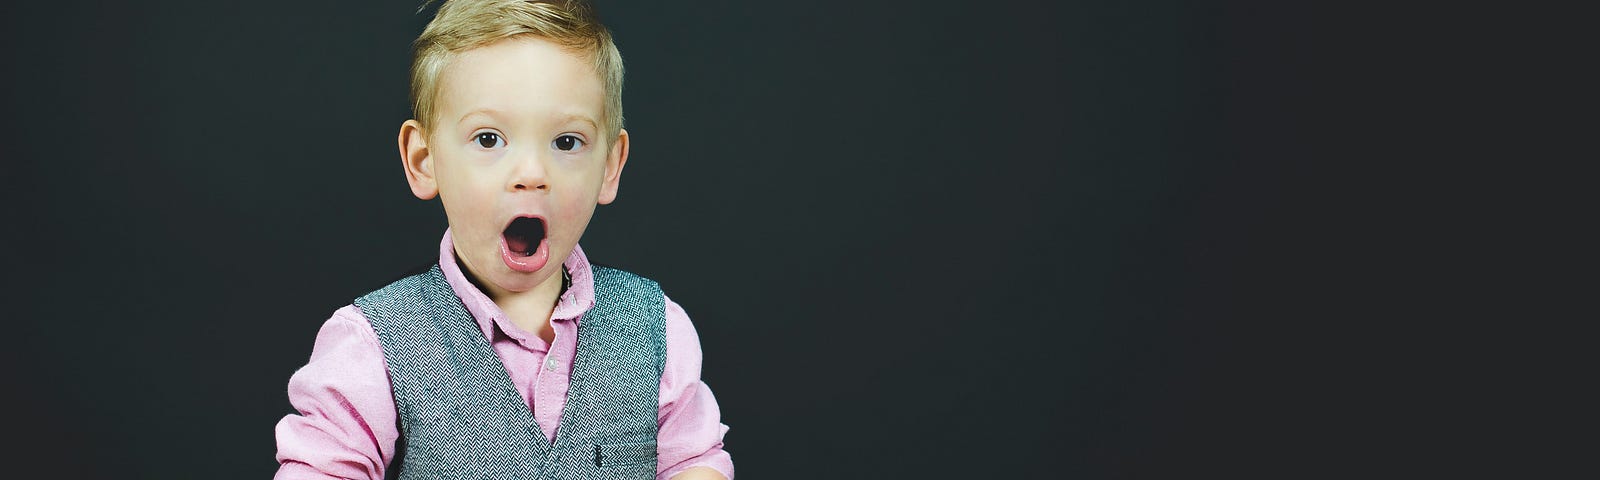 Photo of a white child in jeans, pink shirt and grey waistcoat holding an open book and making a comedy surprised face